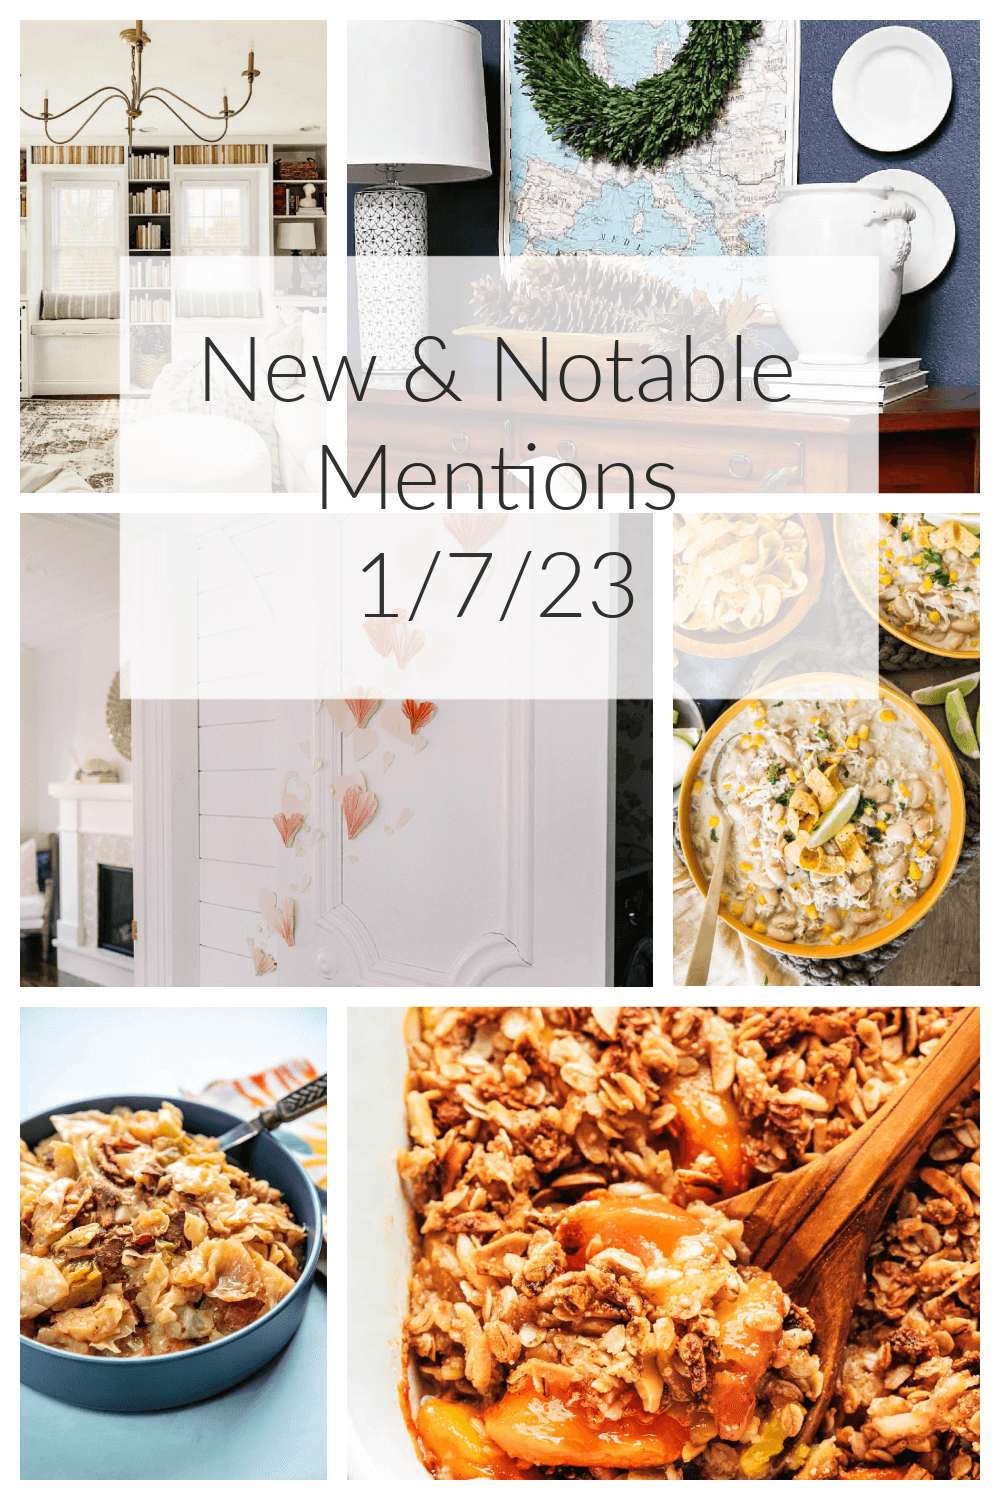 New & Notable Mentions 1/7/23